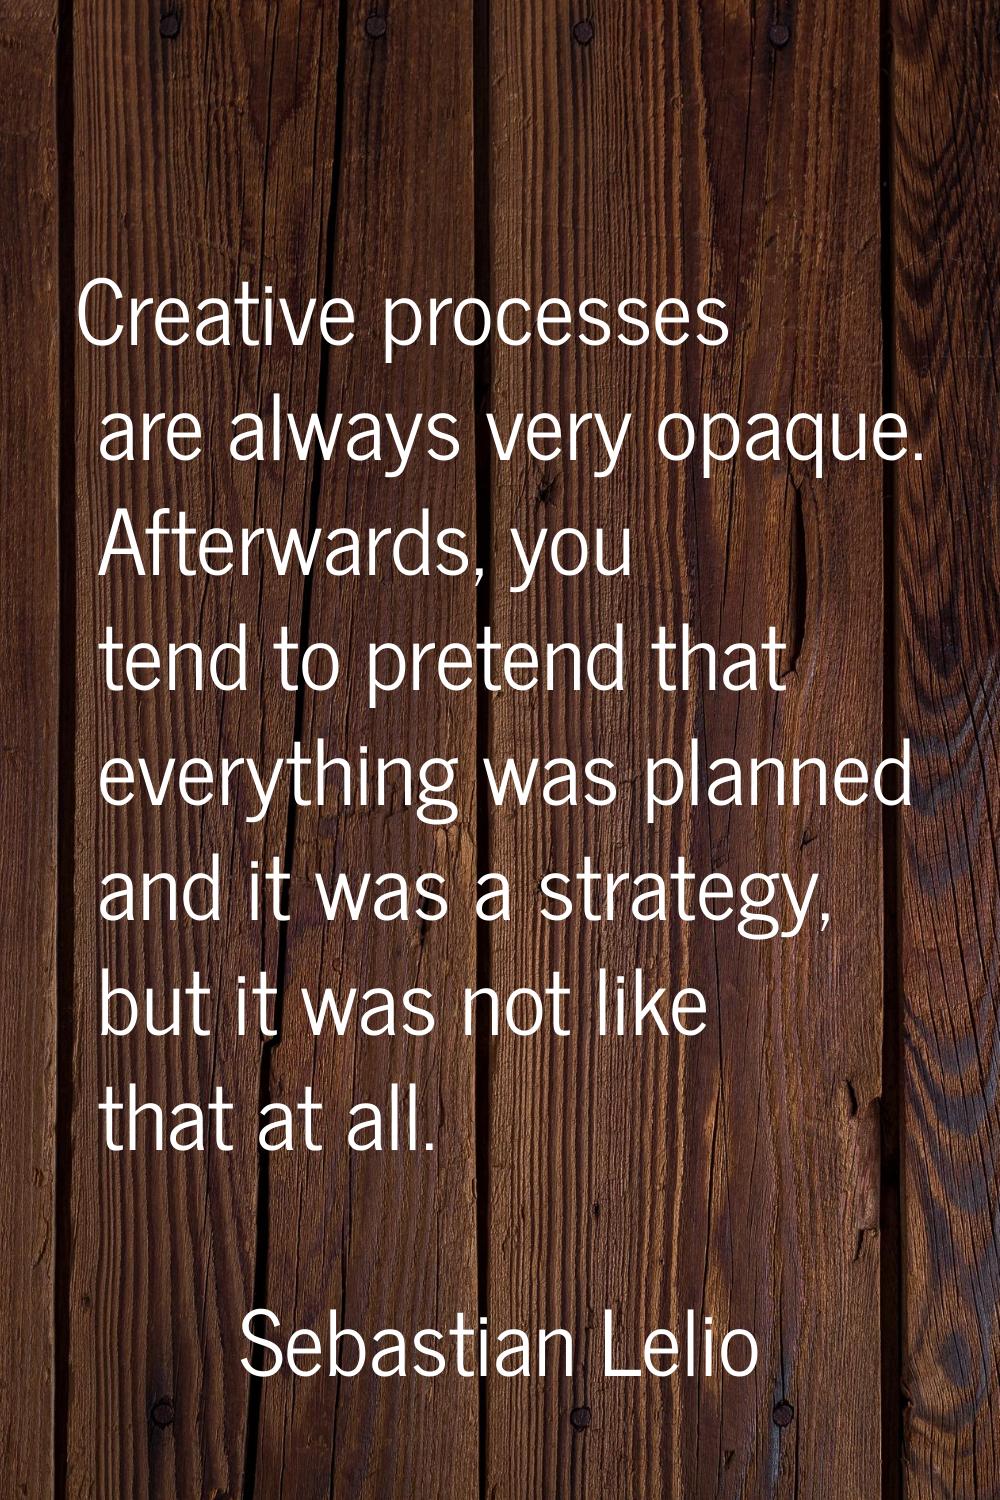 Creative processes are always very opaque. Afterwards, you tend to pretend that everything was plan